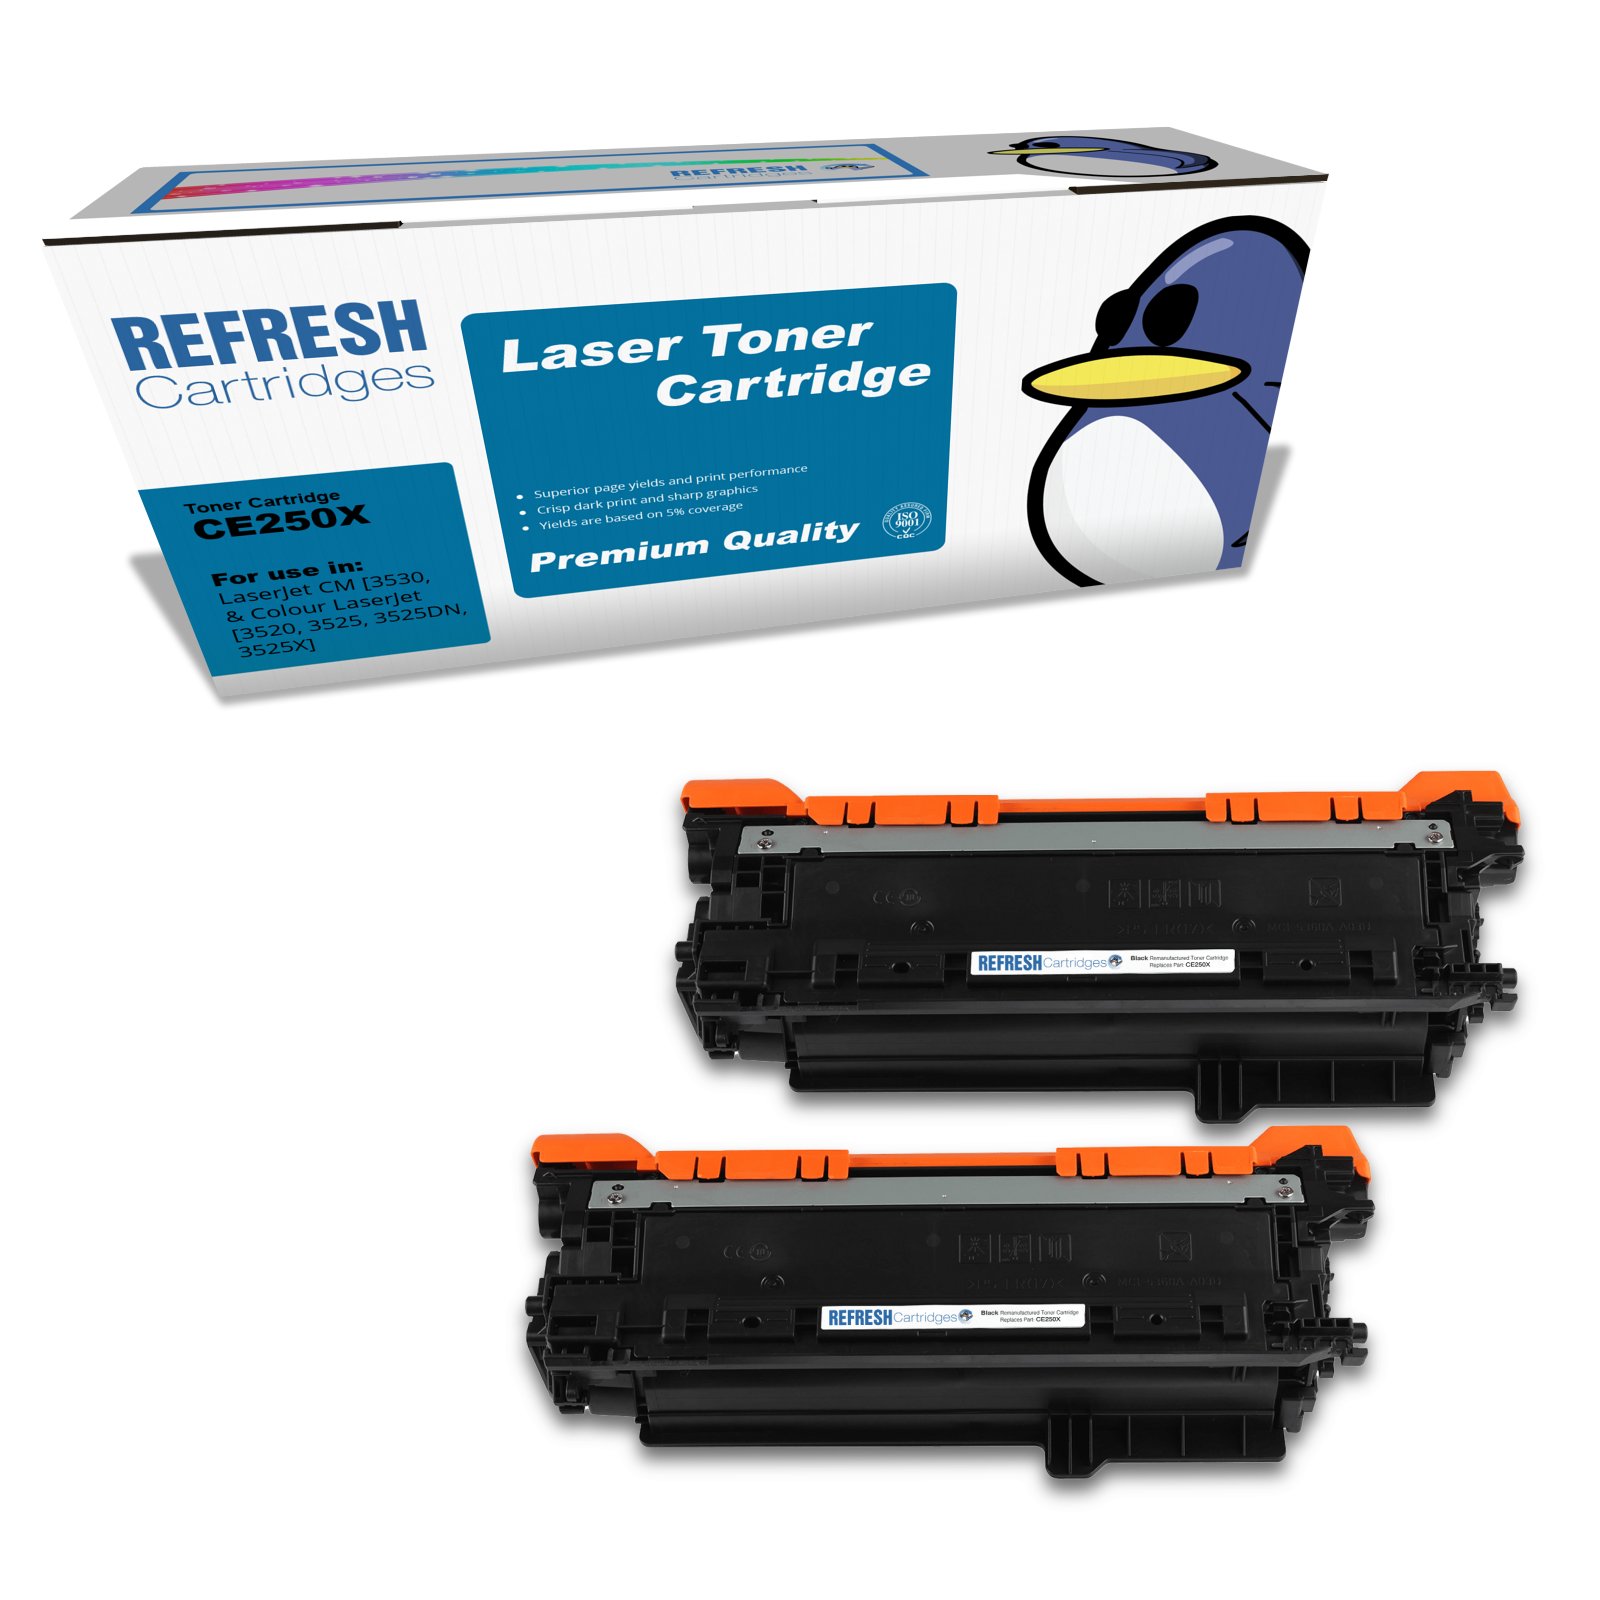 Remanufactured 504X (CE250XD) High Capacity Black Toner Cartridge Twin Pack Replacement for HP Printers